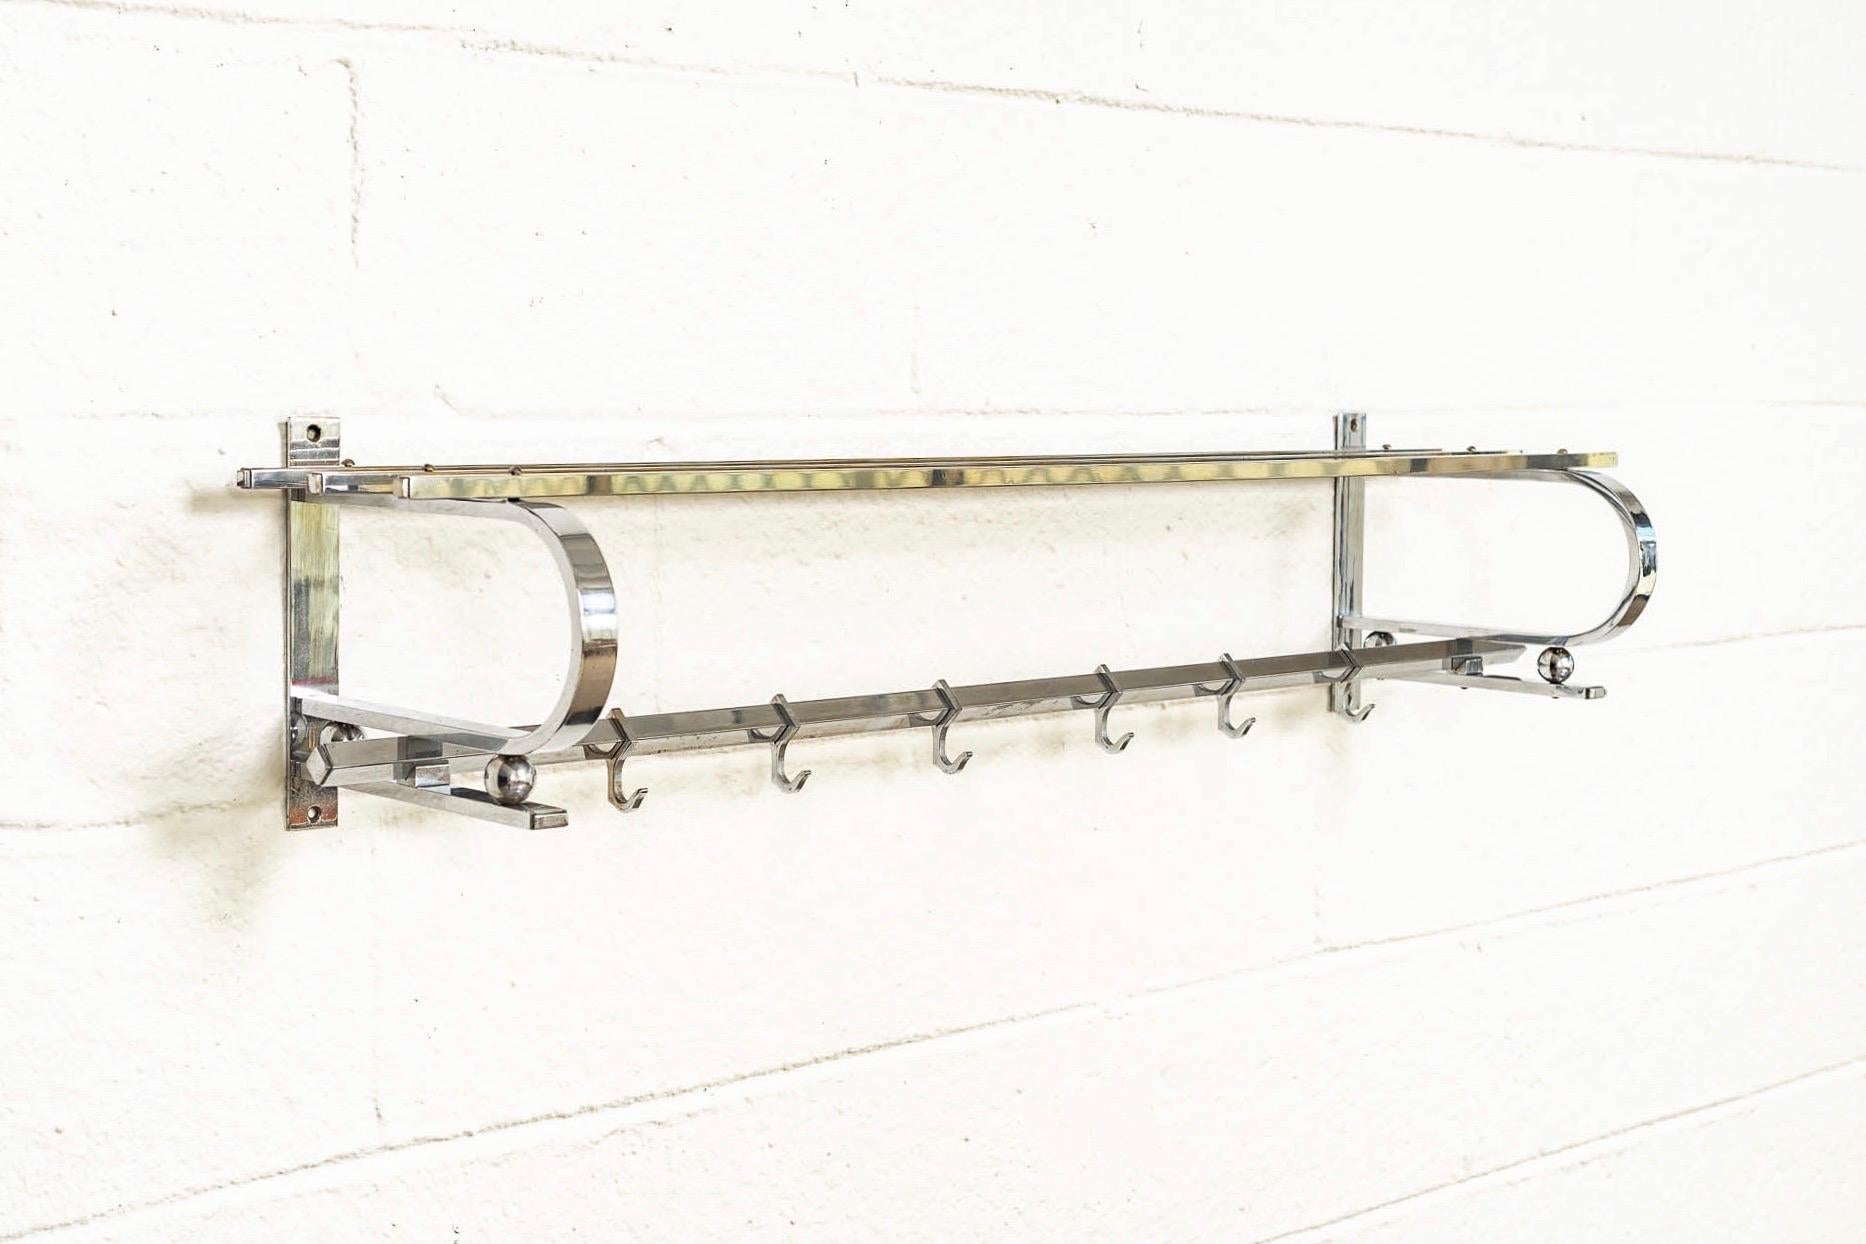 This vintage antique Bauhaus / Art Deco hanging coat and hat rack was made in Germany circa 1930. Constructed of chrome-plated steel, the sleek, modernist design features a three bar upper shelf and one lower bar with six adjustable sliding hooks.